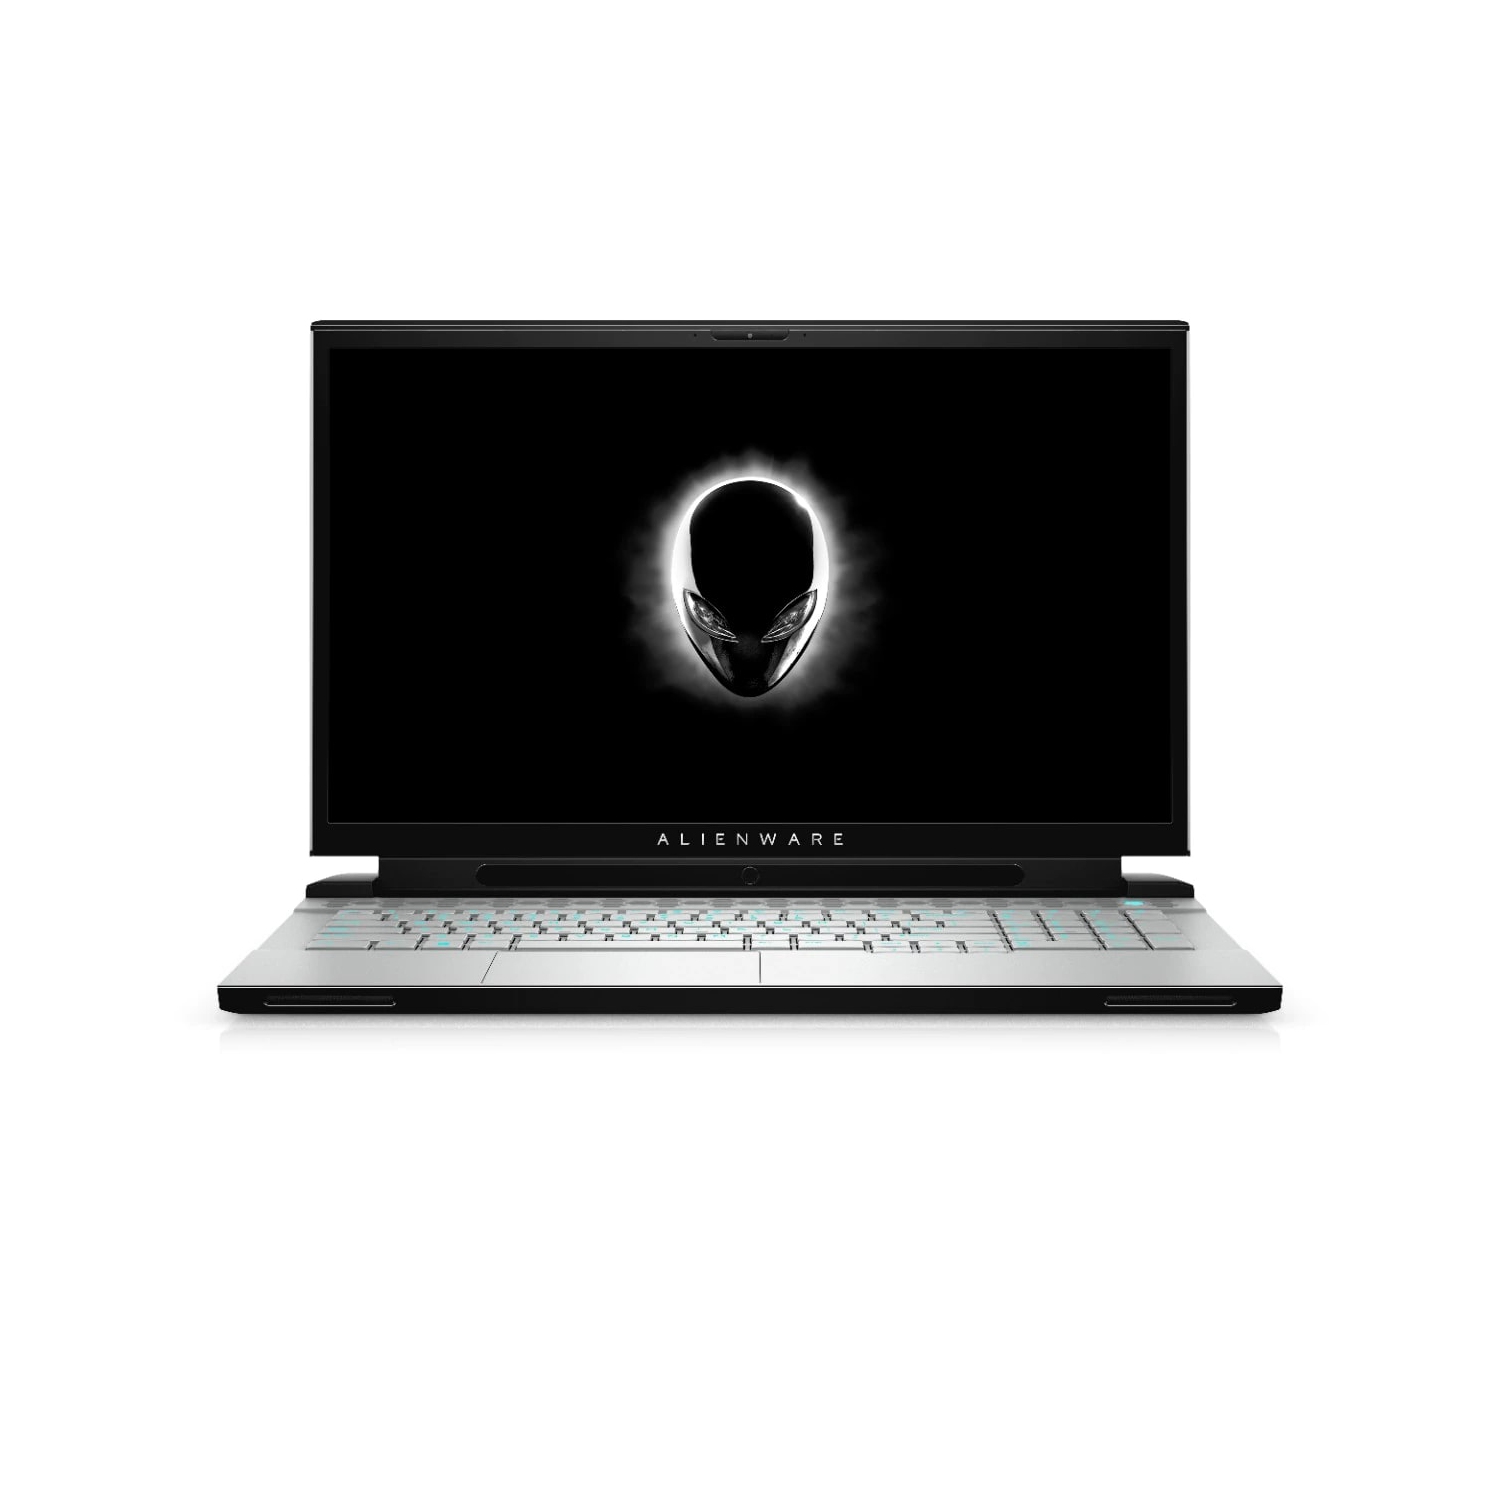 Refurbished (Excellent) - Dell Alienware m17 R2 Gaming Laptop (2019), 17.3" FHD, Core i7, 512GB SSD + 512GB SSD, 16GB RAM, RTX 2070, 6 Cores @ 4.5 GHz Certified